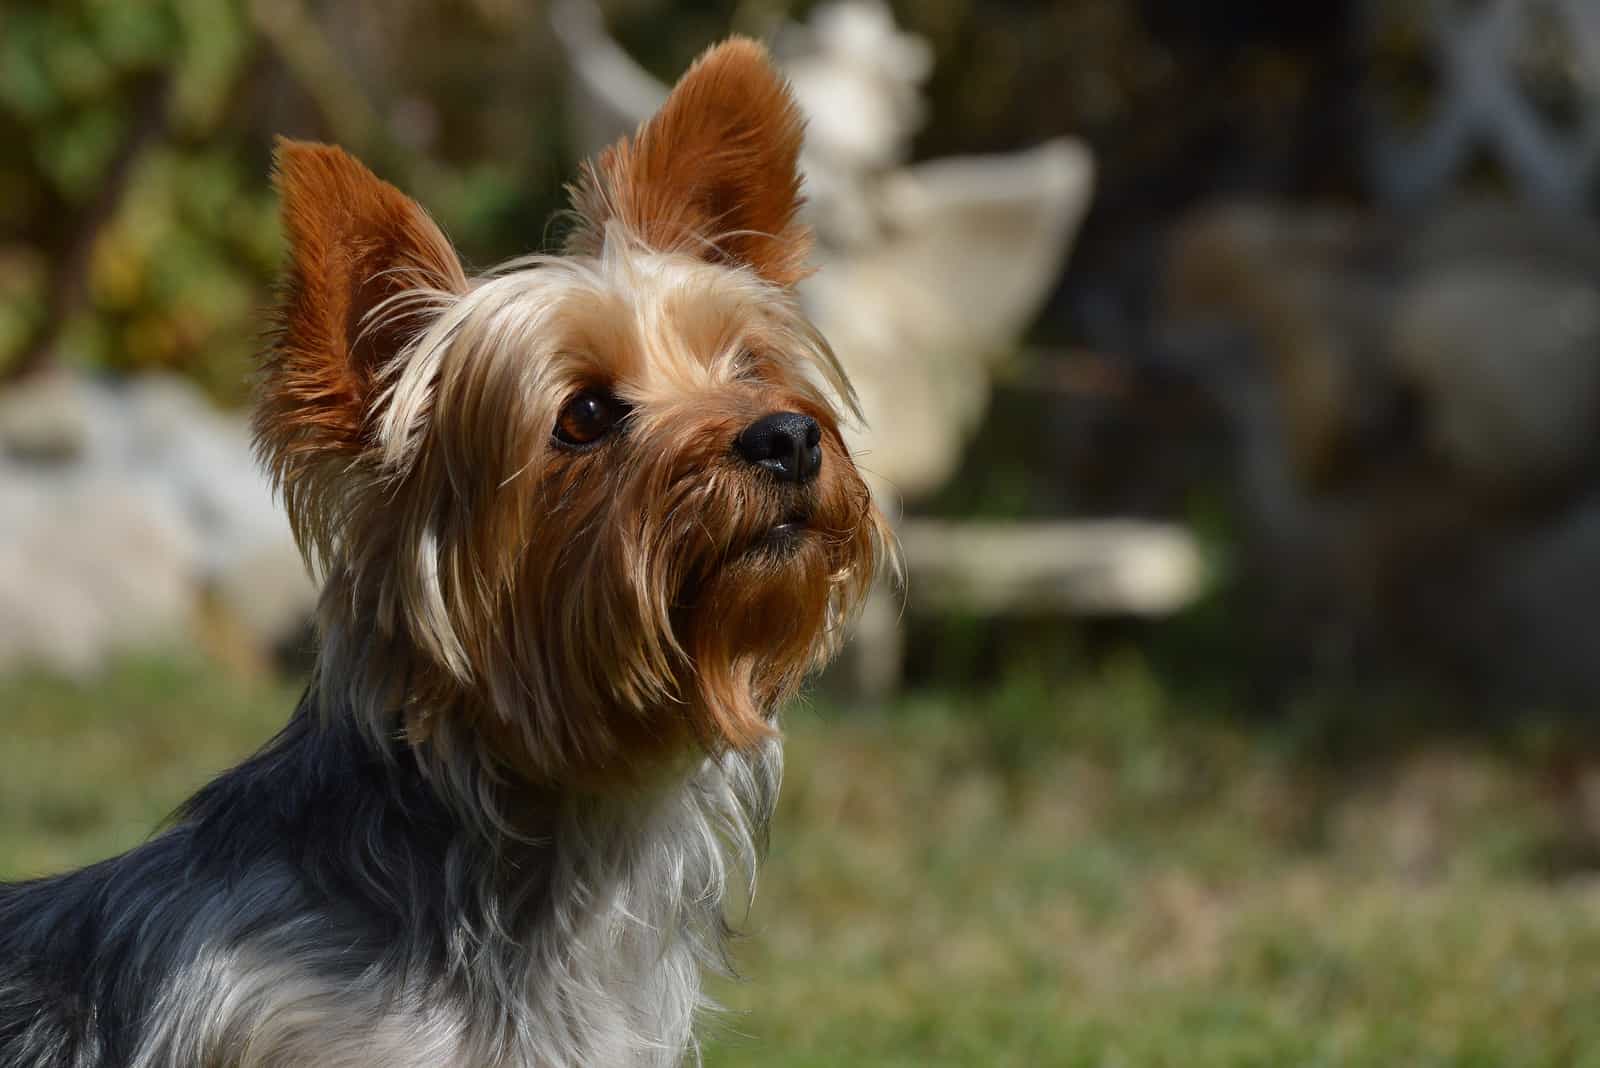 Adorable Yorkie dog standing outdoors